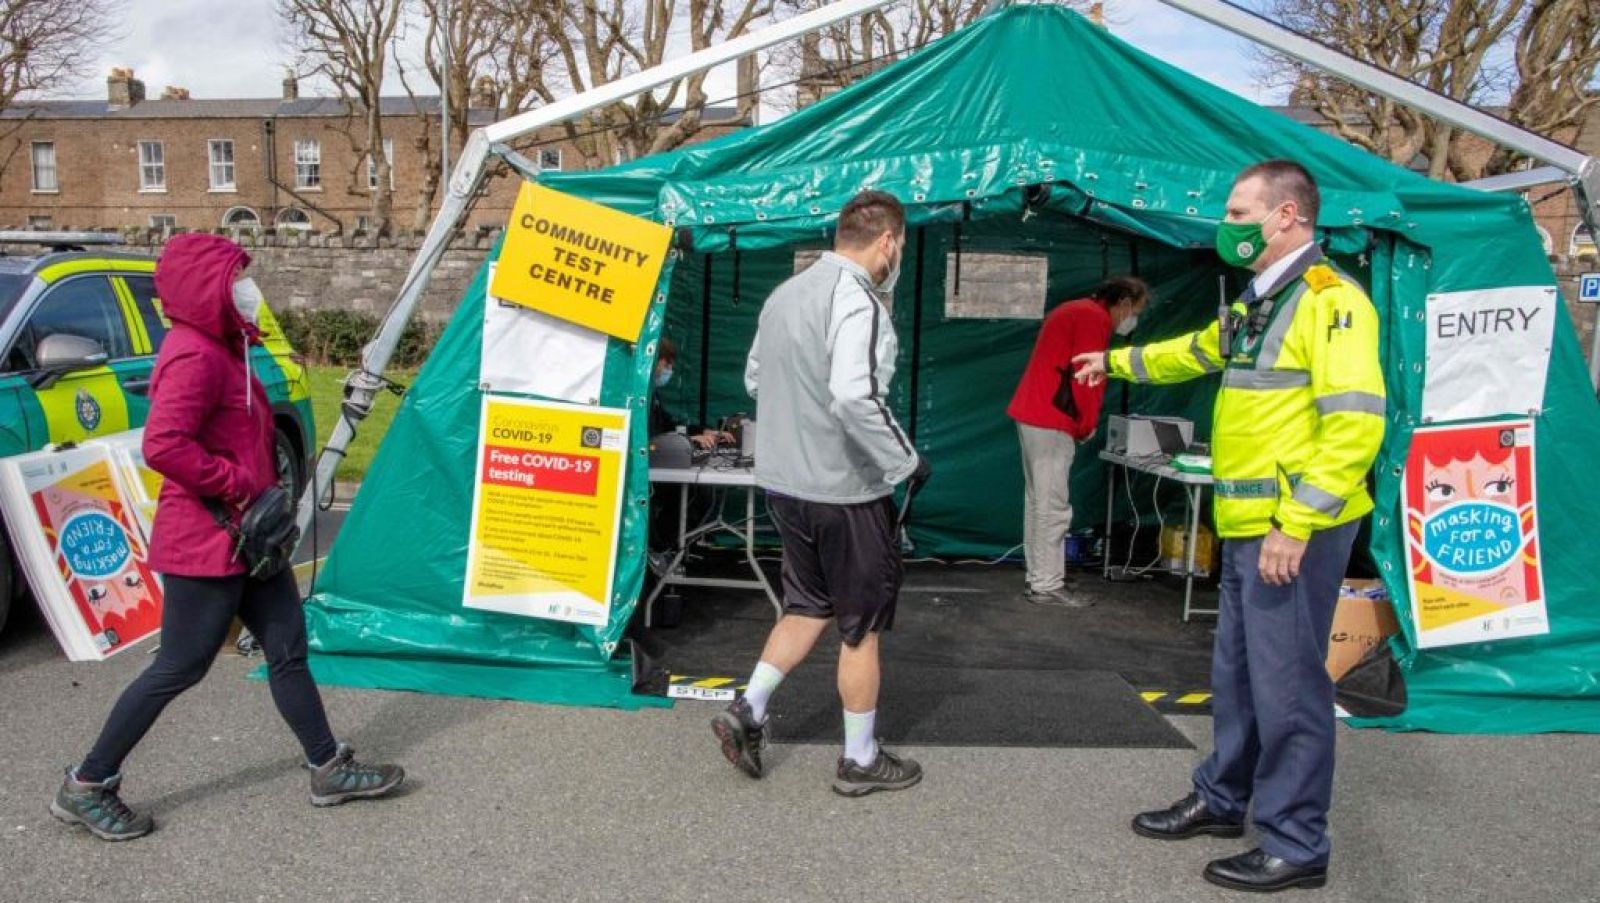 A Health Worker Directs People At A Walk-In Portable Testing Centre For Covid-19 In Dublin. Photo: Paul Faith/Afp Via Getty